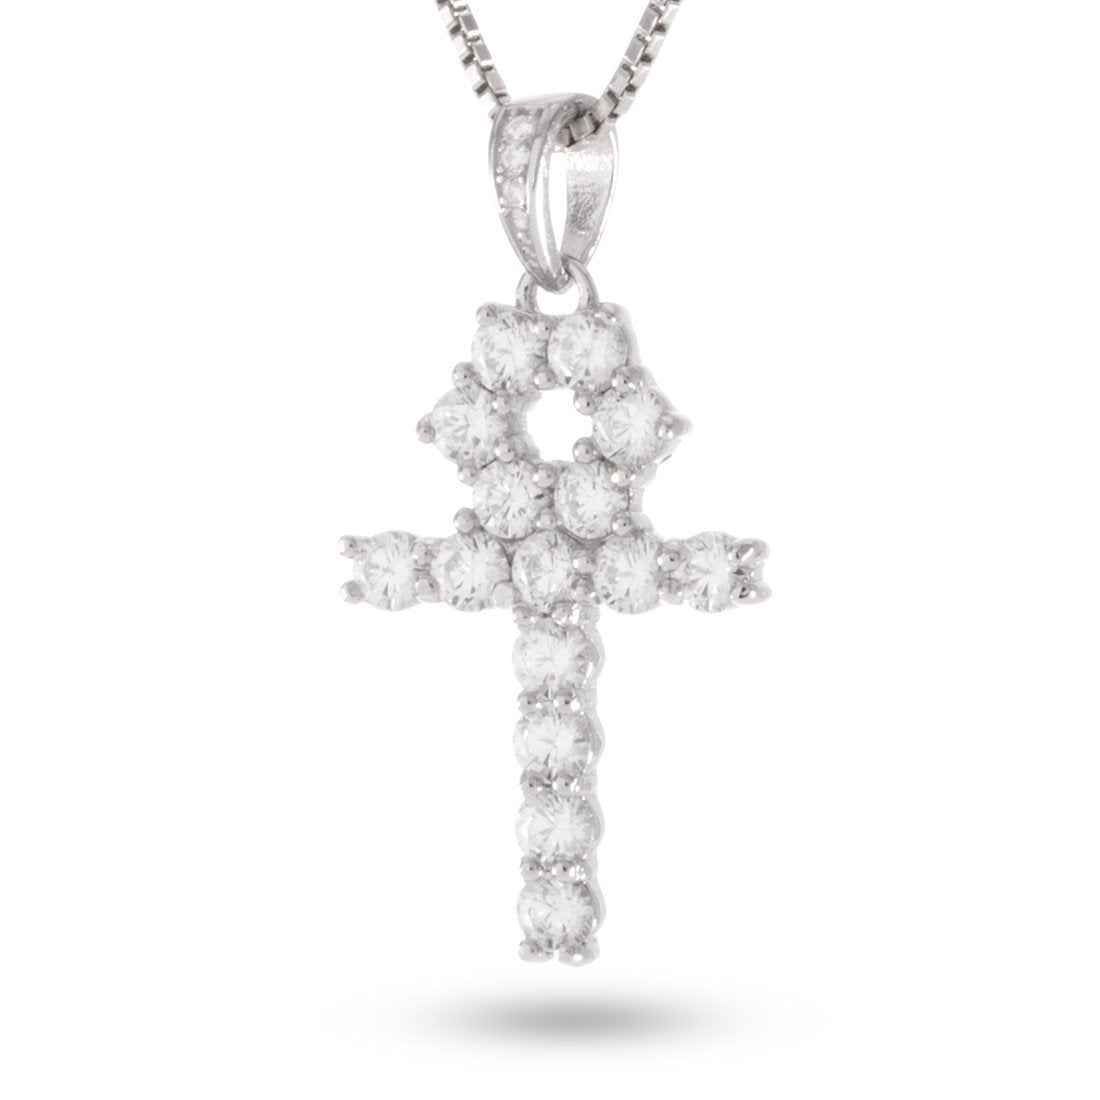 The Sterling Silver Micro Ankh Cross - Silver White Gold